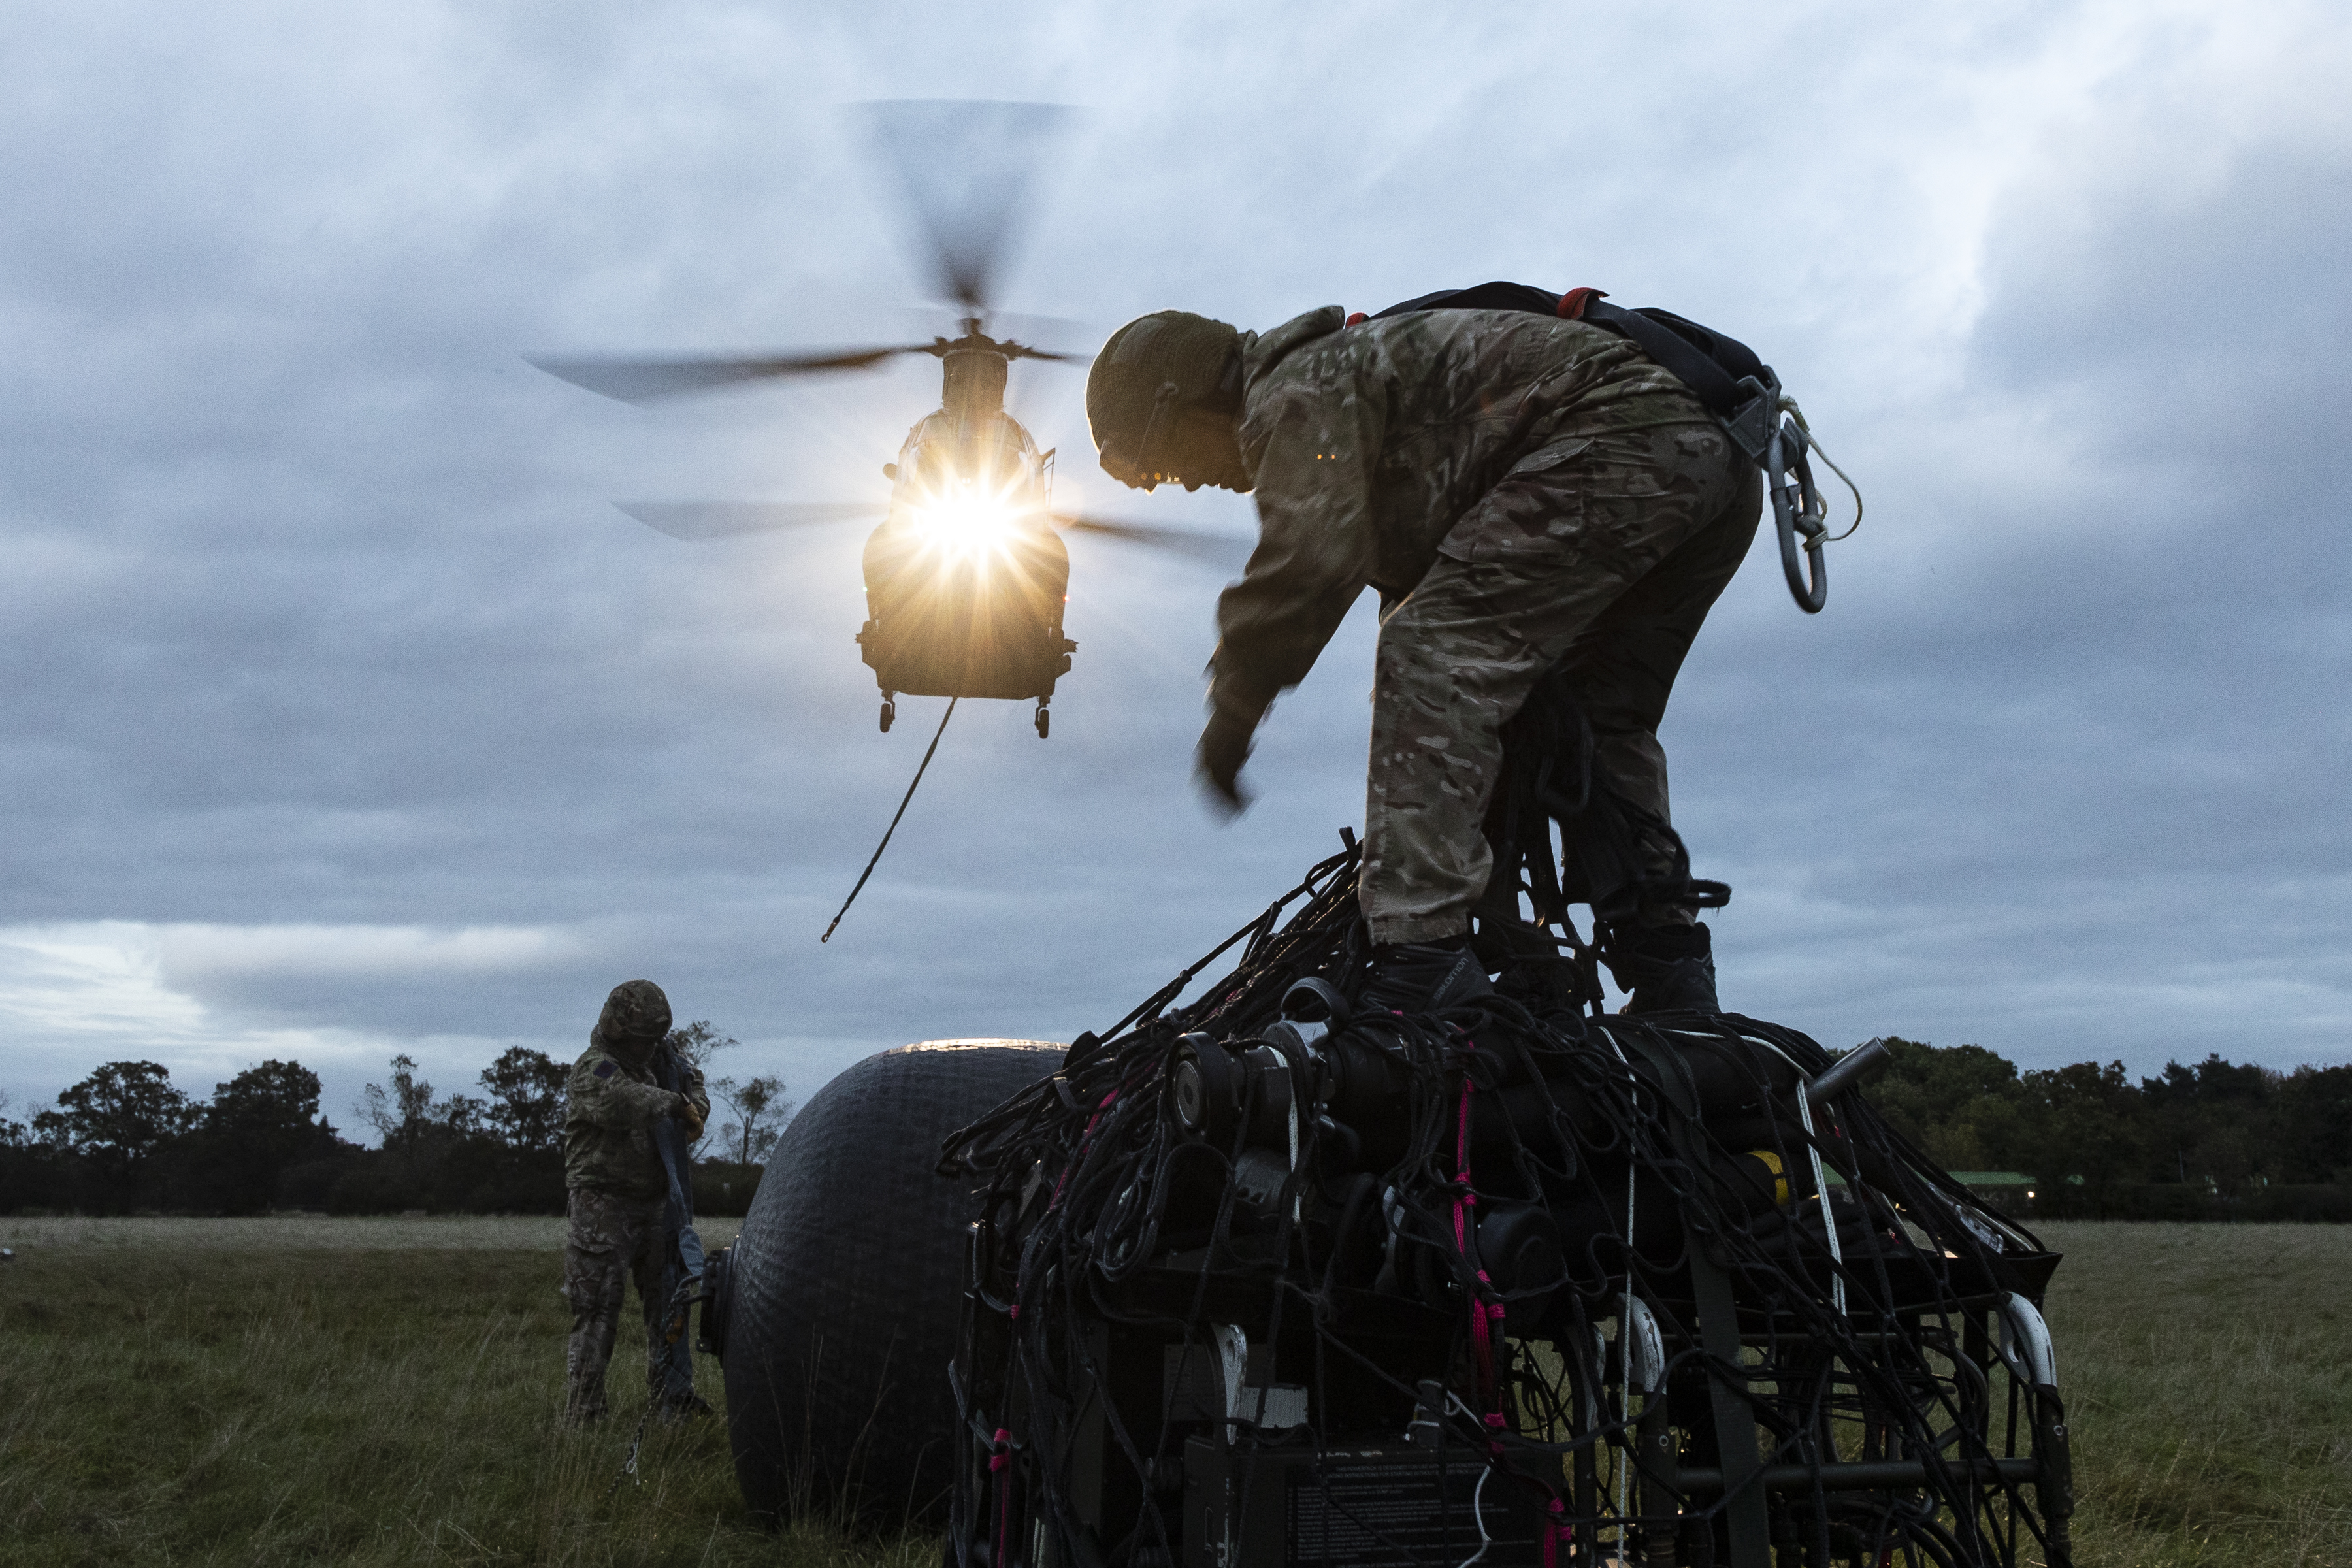 A soldier from 23 Parachute Engineer Regiment stands on top of a netted load ready to hook it under the approaching Chinook, which can be seen with its lights on as it approaches from the ground